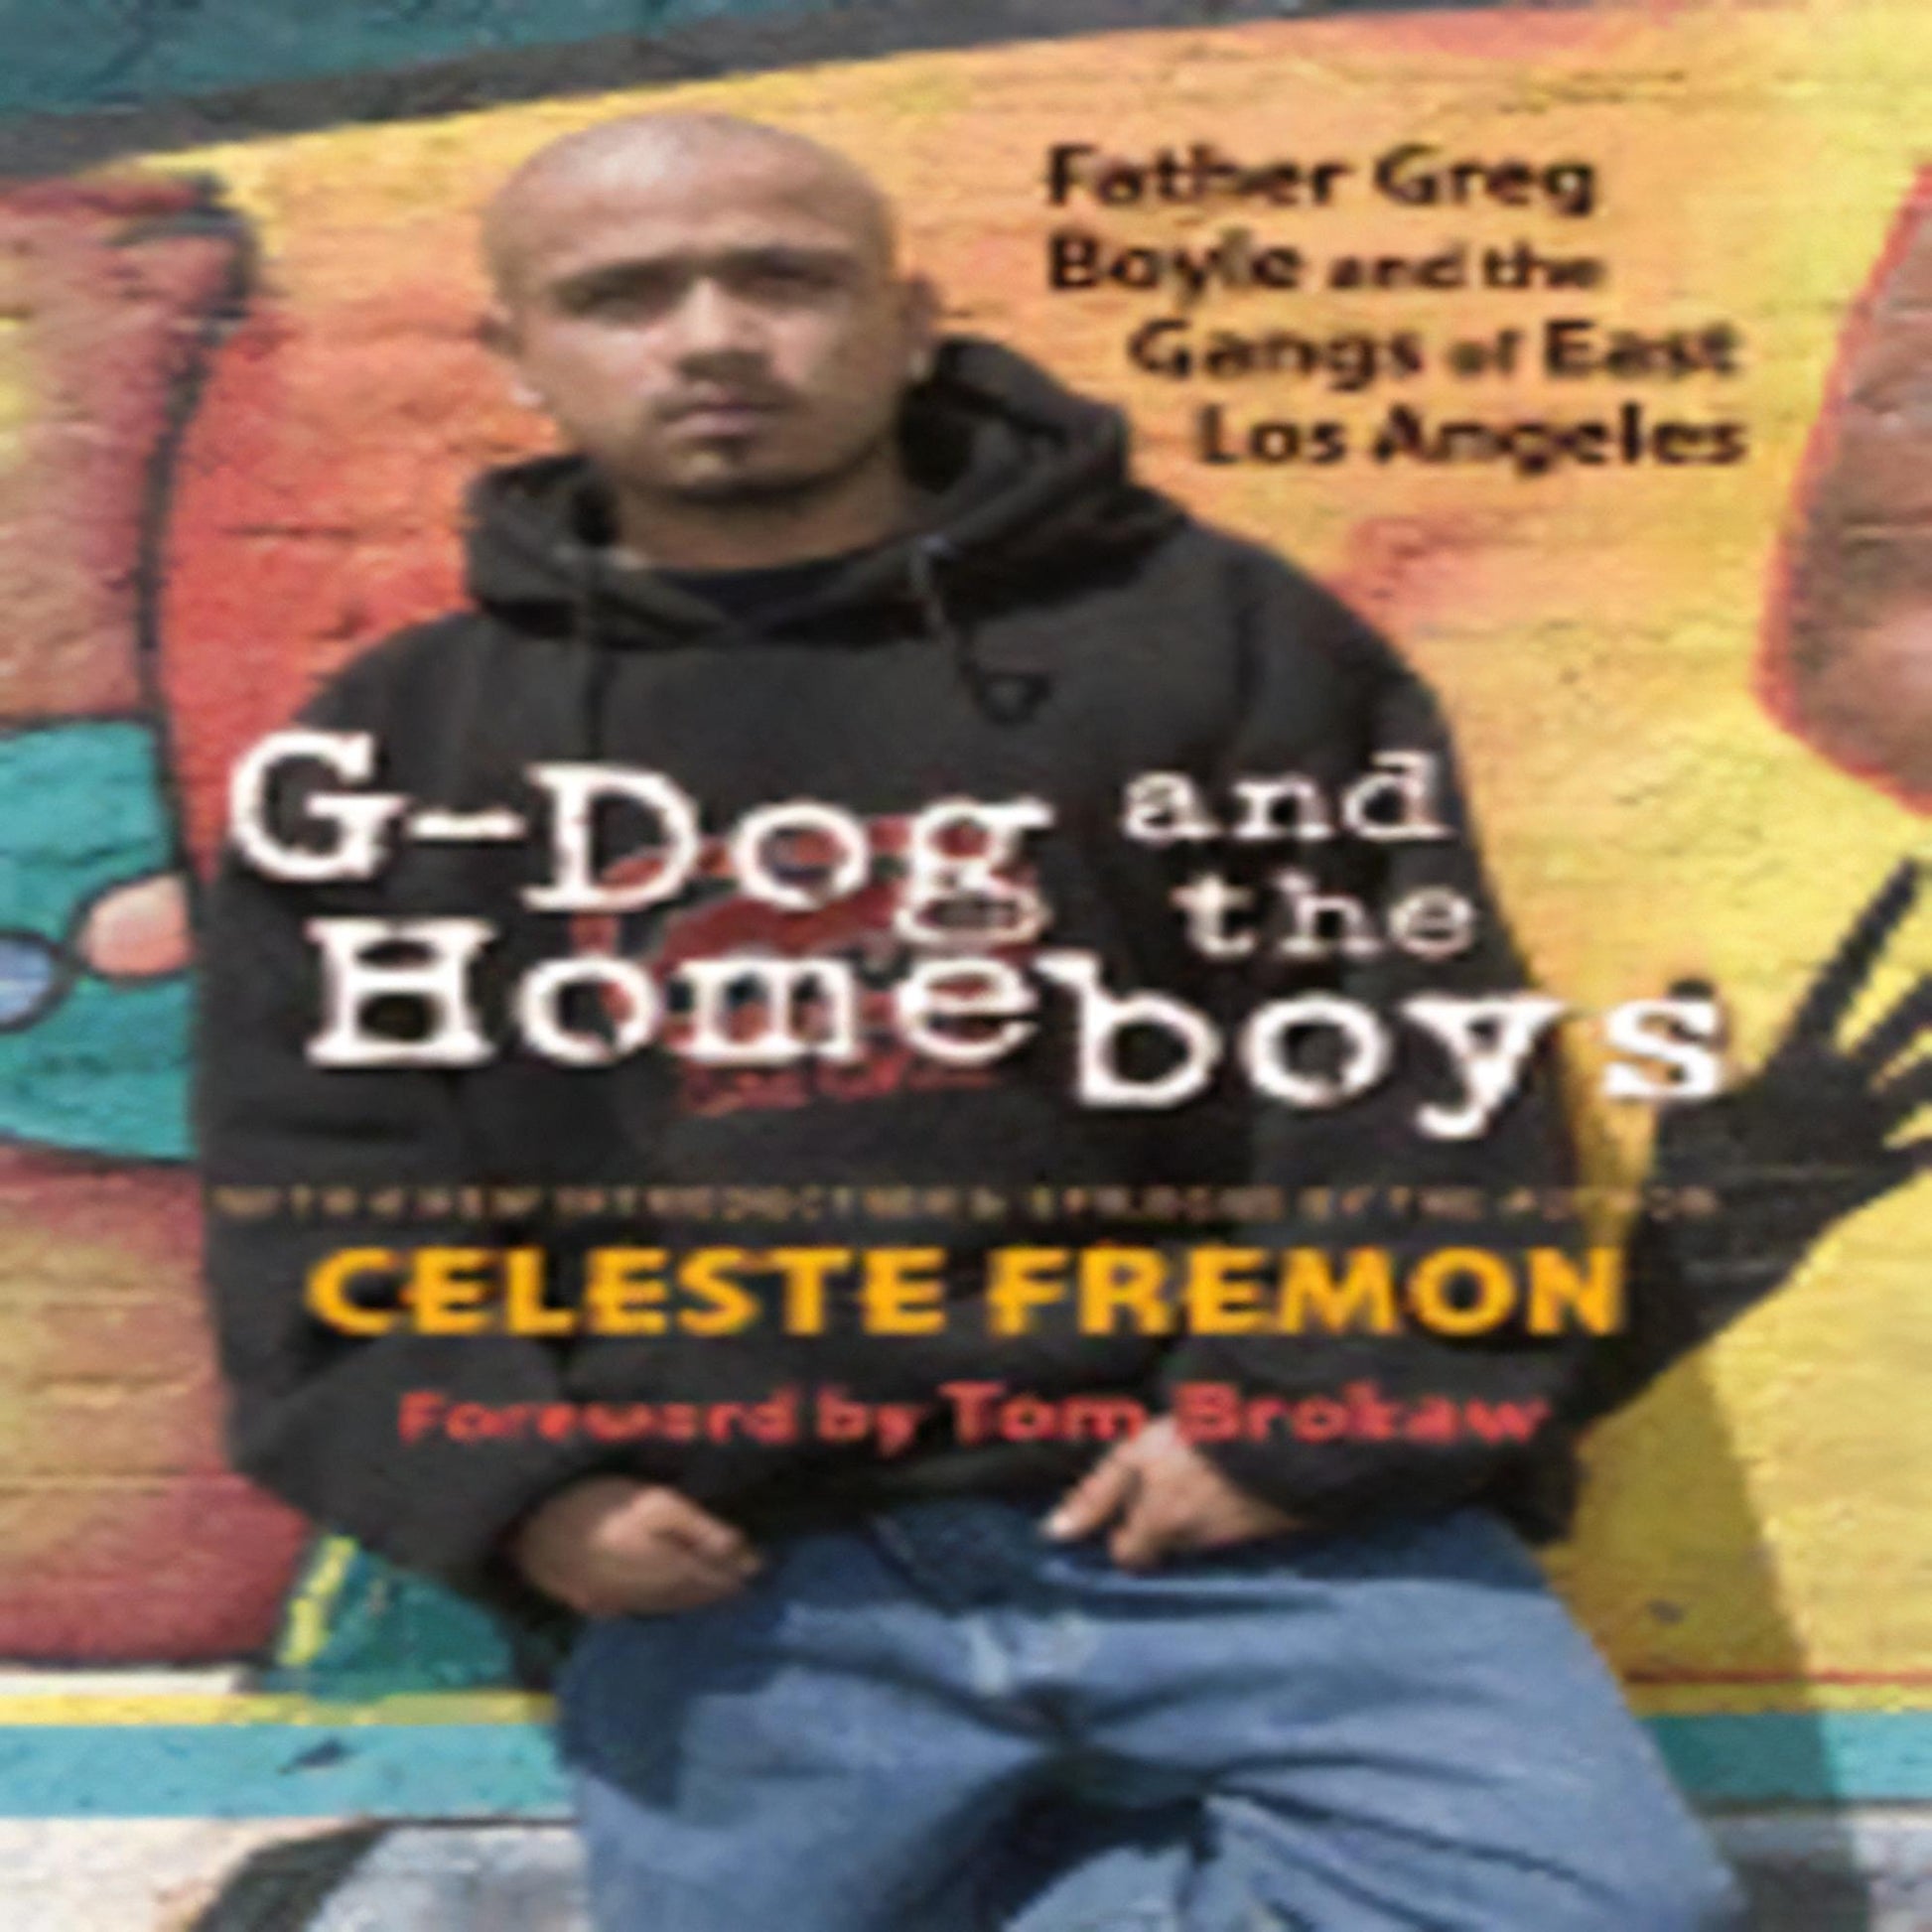 G-Dog and the Homeboys: Father Greg Boyle and the Gangs of East Los Angeles (Revised)294-051123-9780826344854DPGBOOKSTORE.COM. Today's Bestsellers.